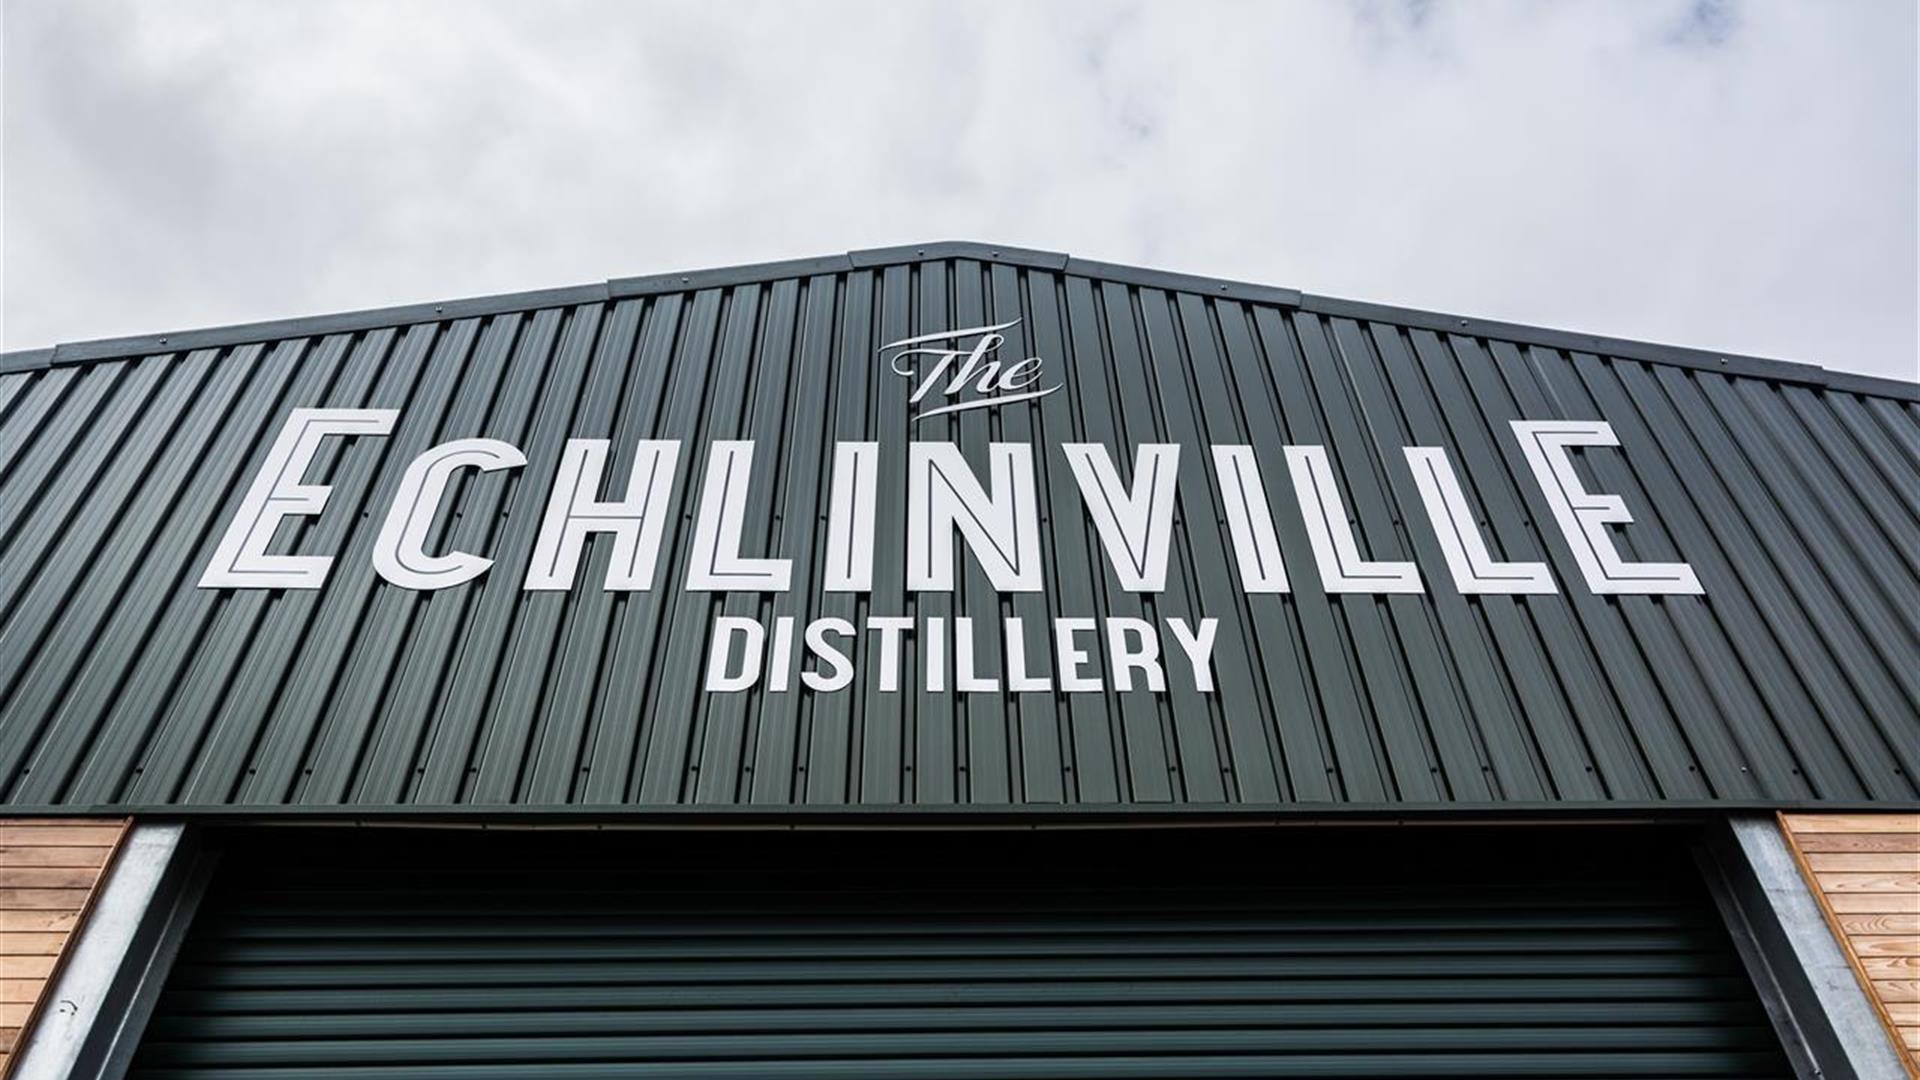 Photo of  The Echlinville Distillery sign on exterior to building